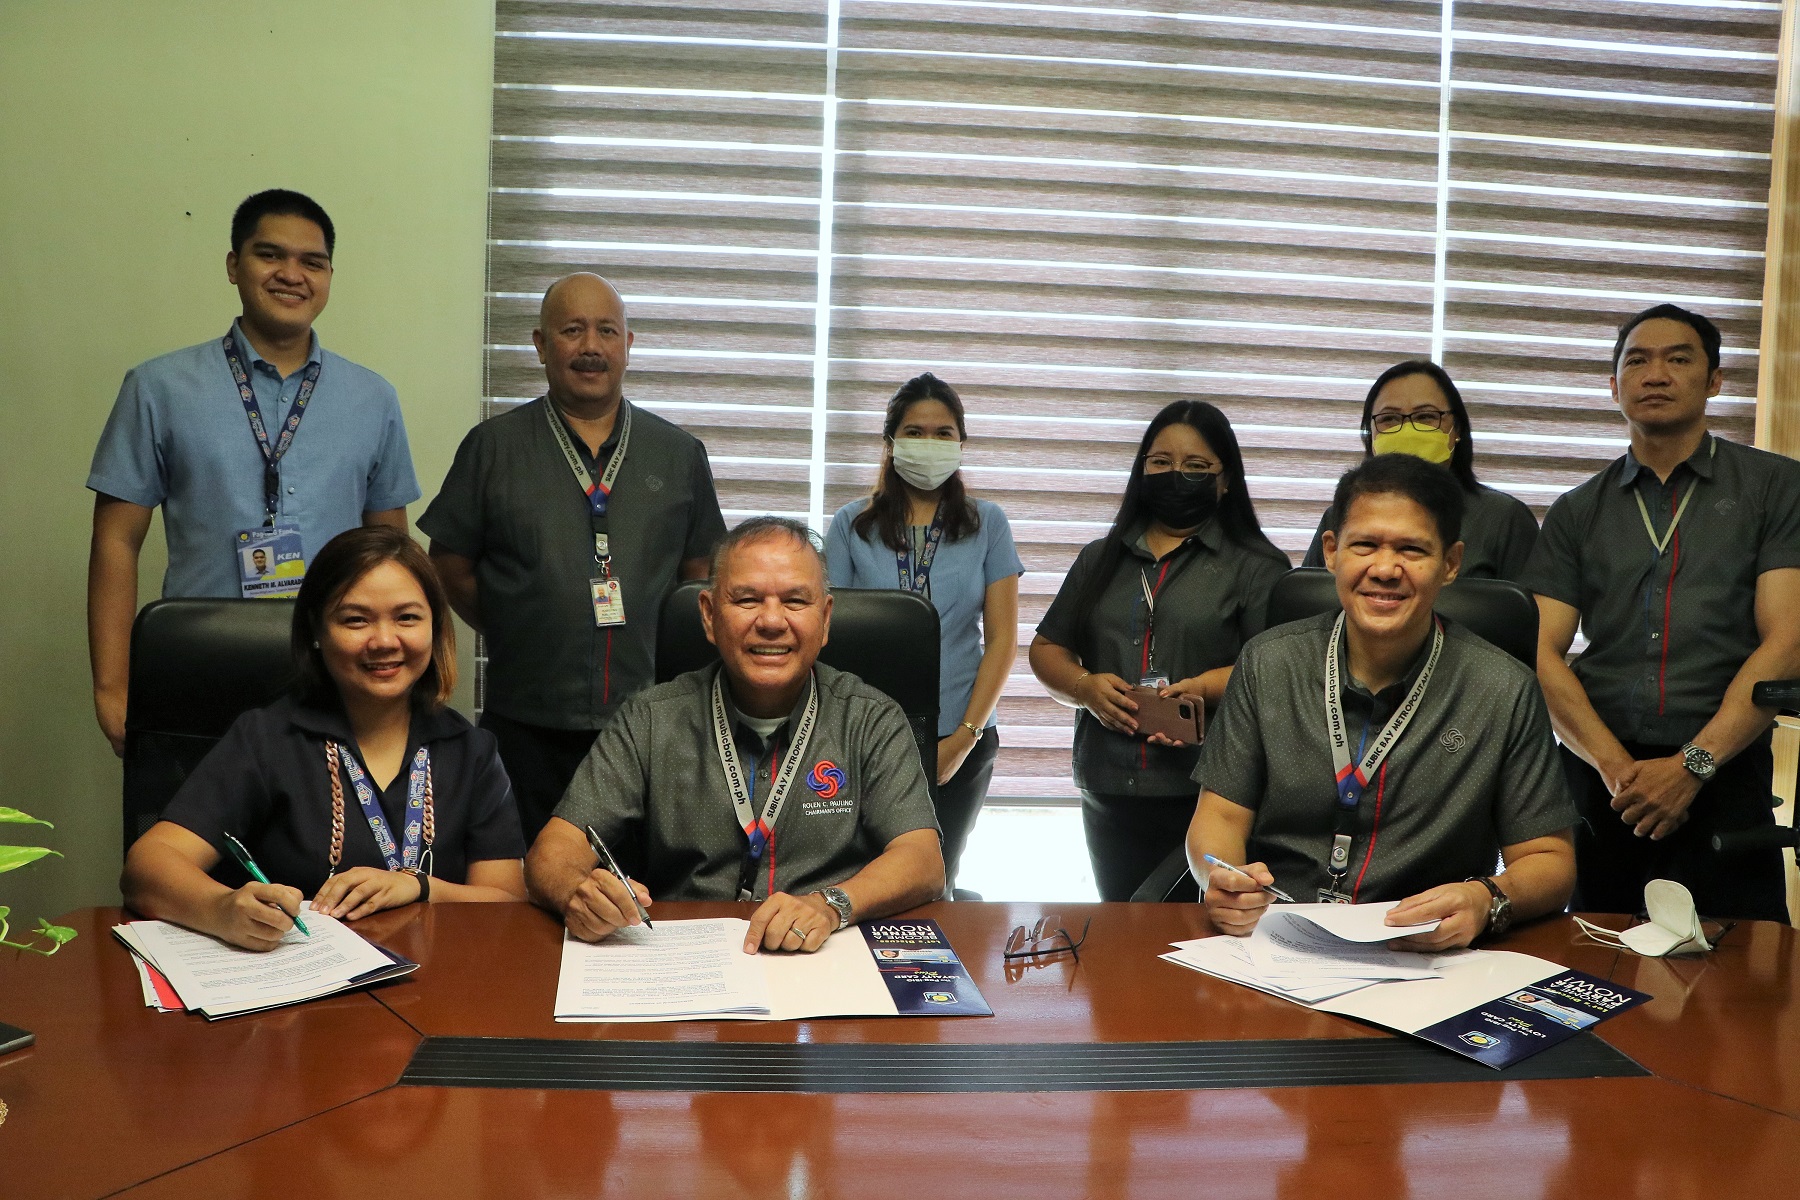 SBMA Chairman and Administrator Rolen C. Paulino and Pag-IBIG Fund representative Sharon Ravelo, on behalf of Pag-IBIG Central Luzon I Area Head Christian C. Chua, sign a memorandum of agreement (MOA) on the Pag-IBIG Fund Online Short-Term Loan (STL) Application program, which will provide SBMA employees a change to loan from the Pag-IBIG Fund, with payments coursed thru salary deduction.